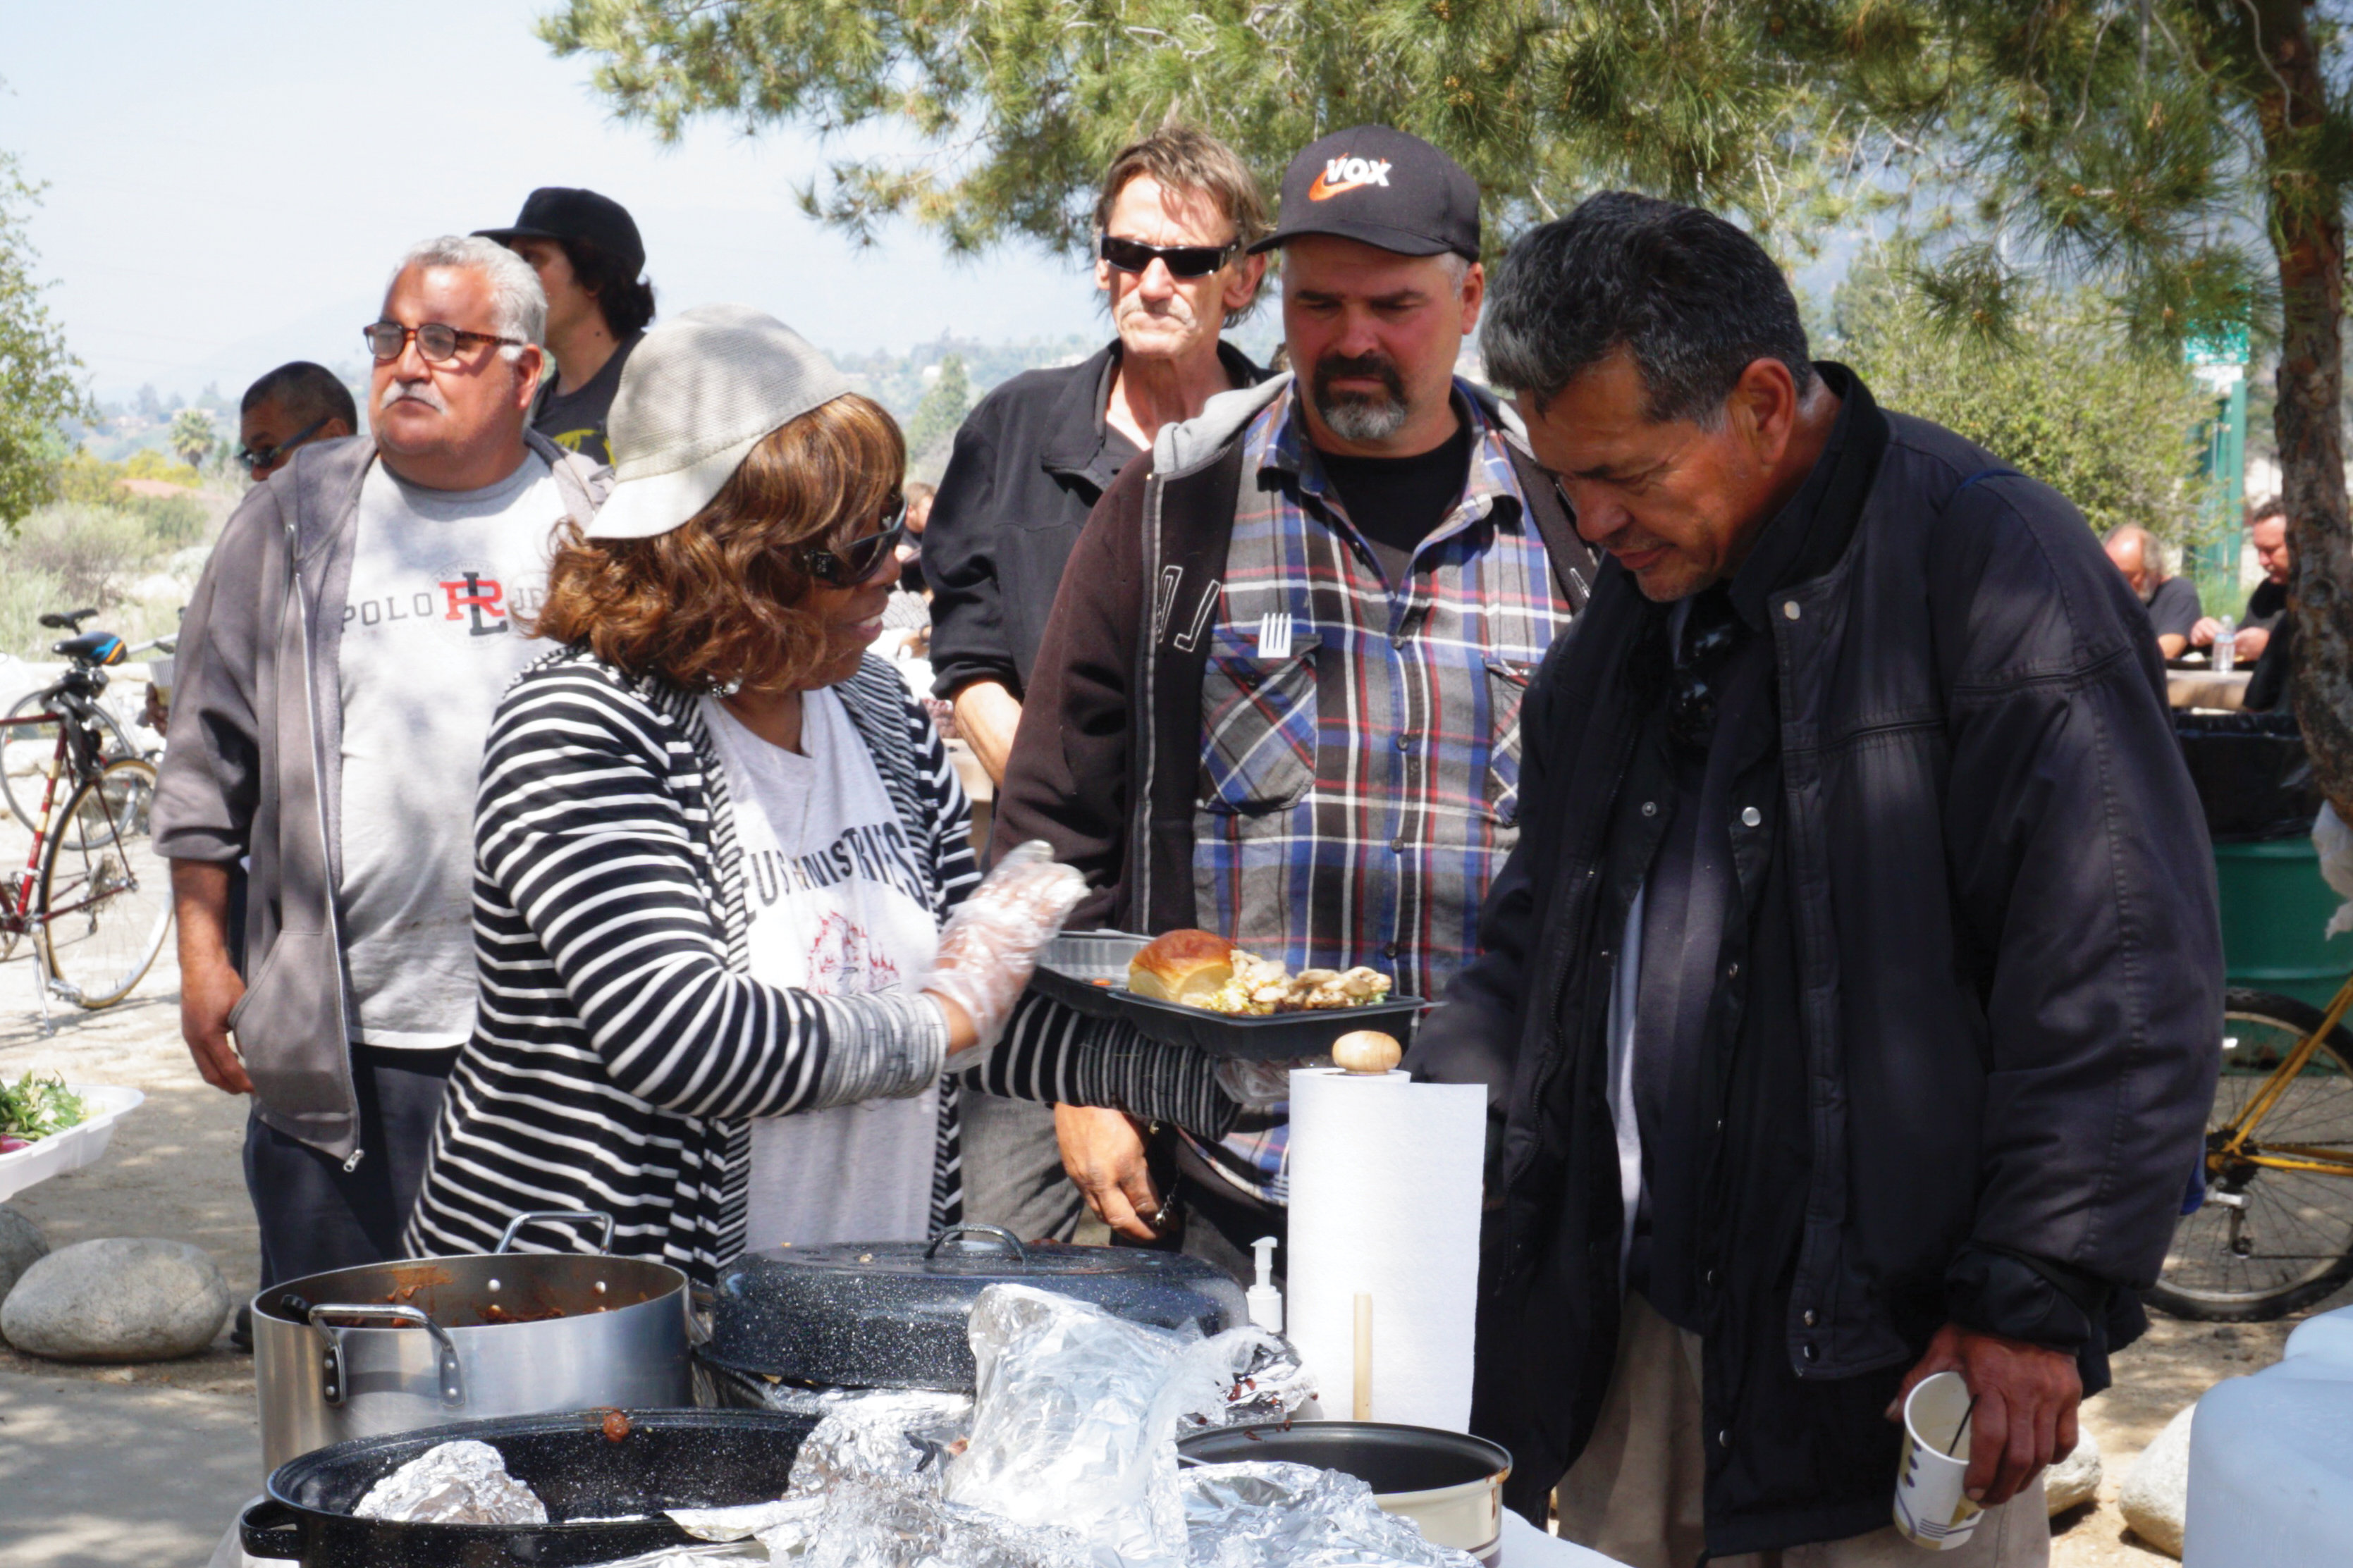 The grannies of glendora feed the homeless